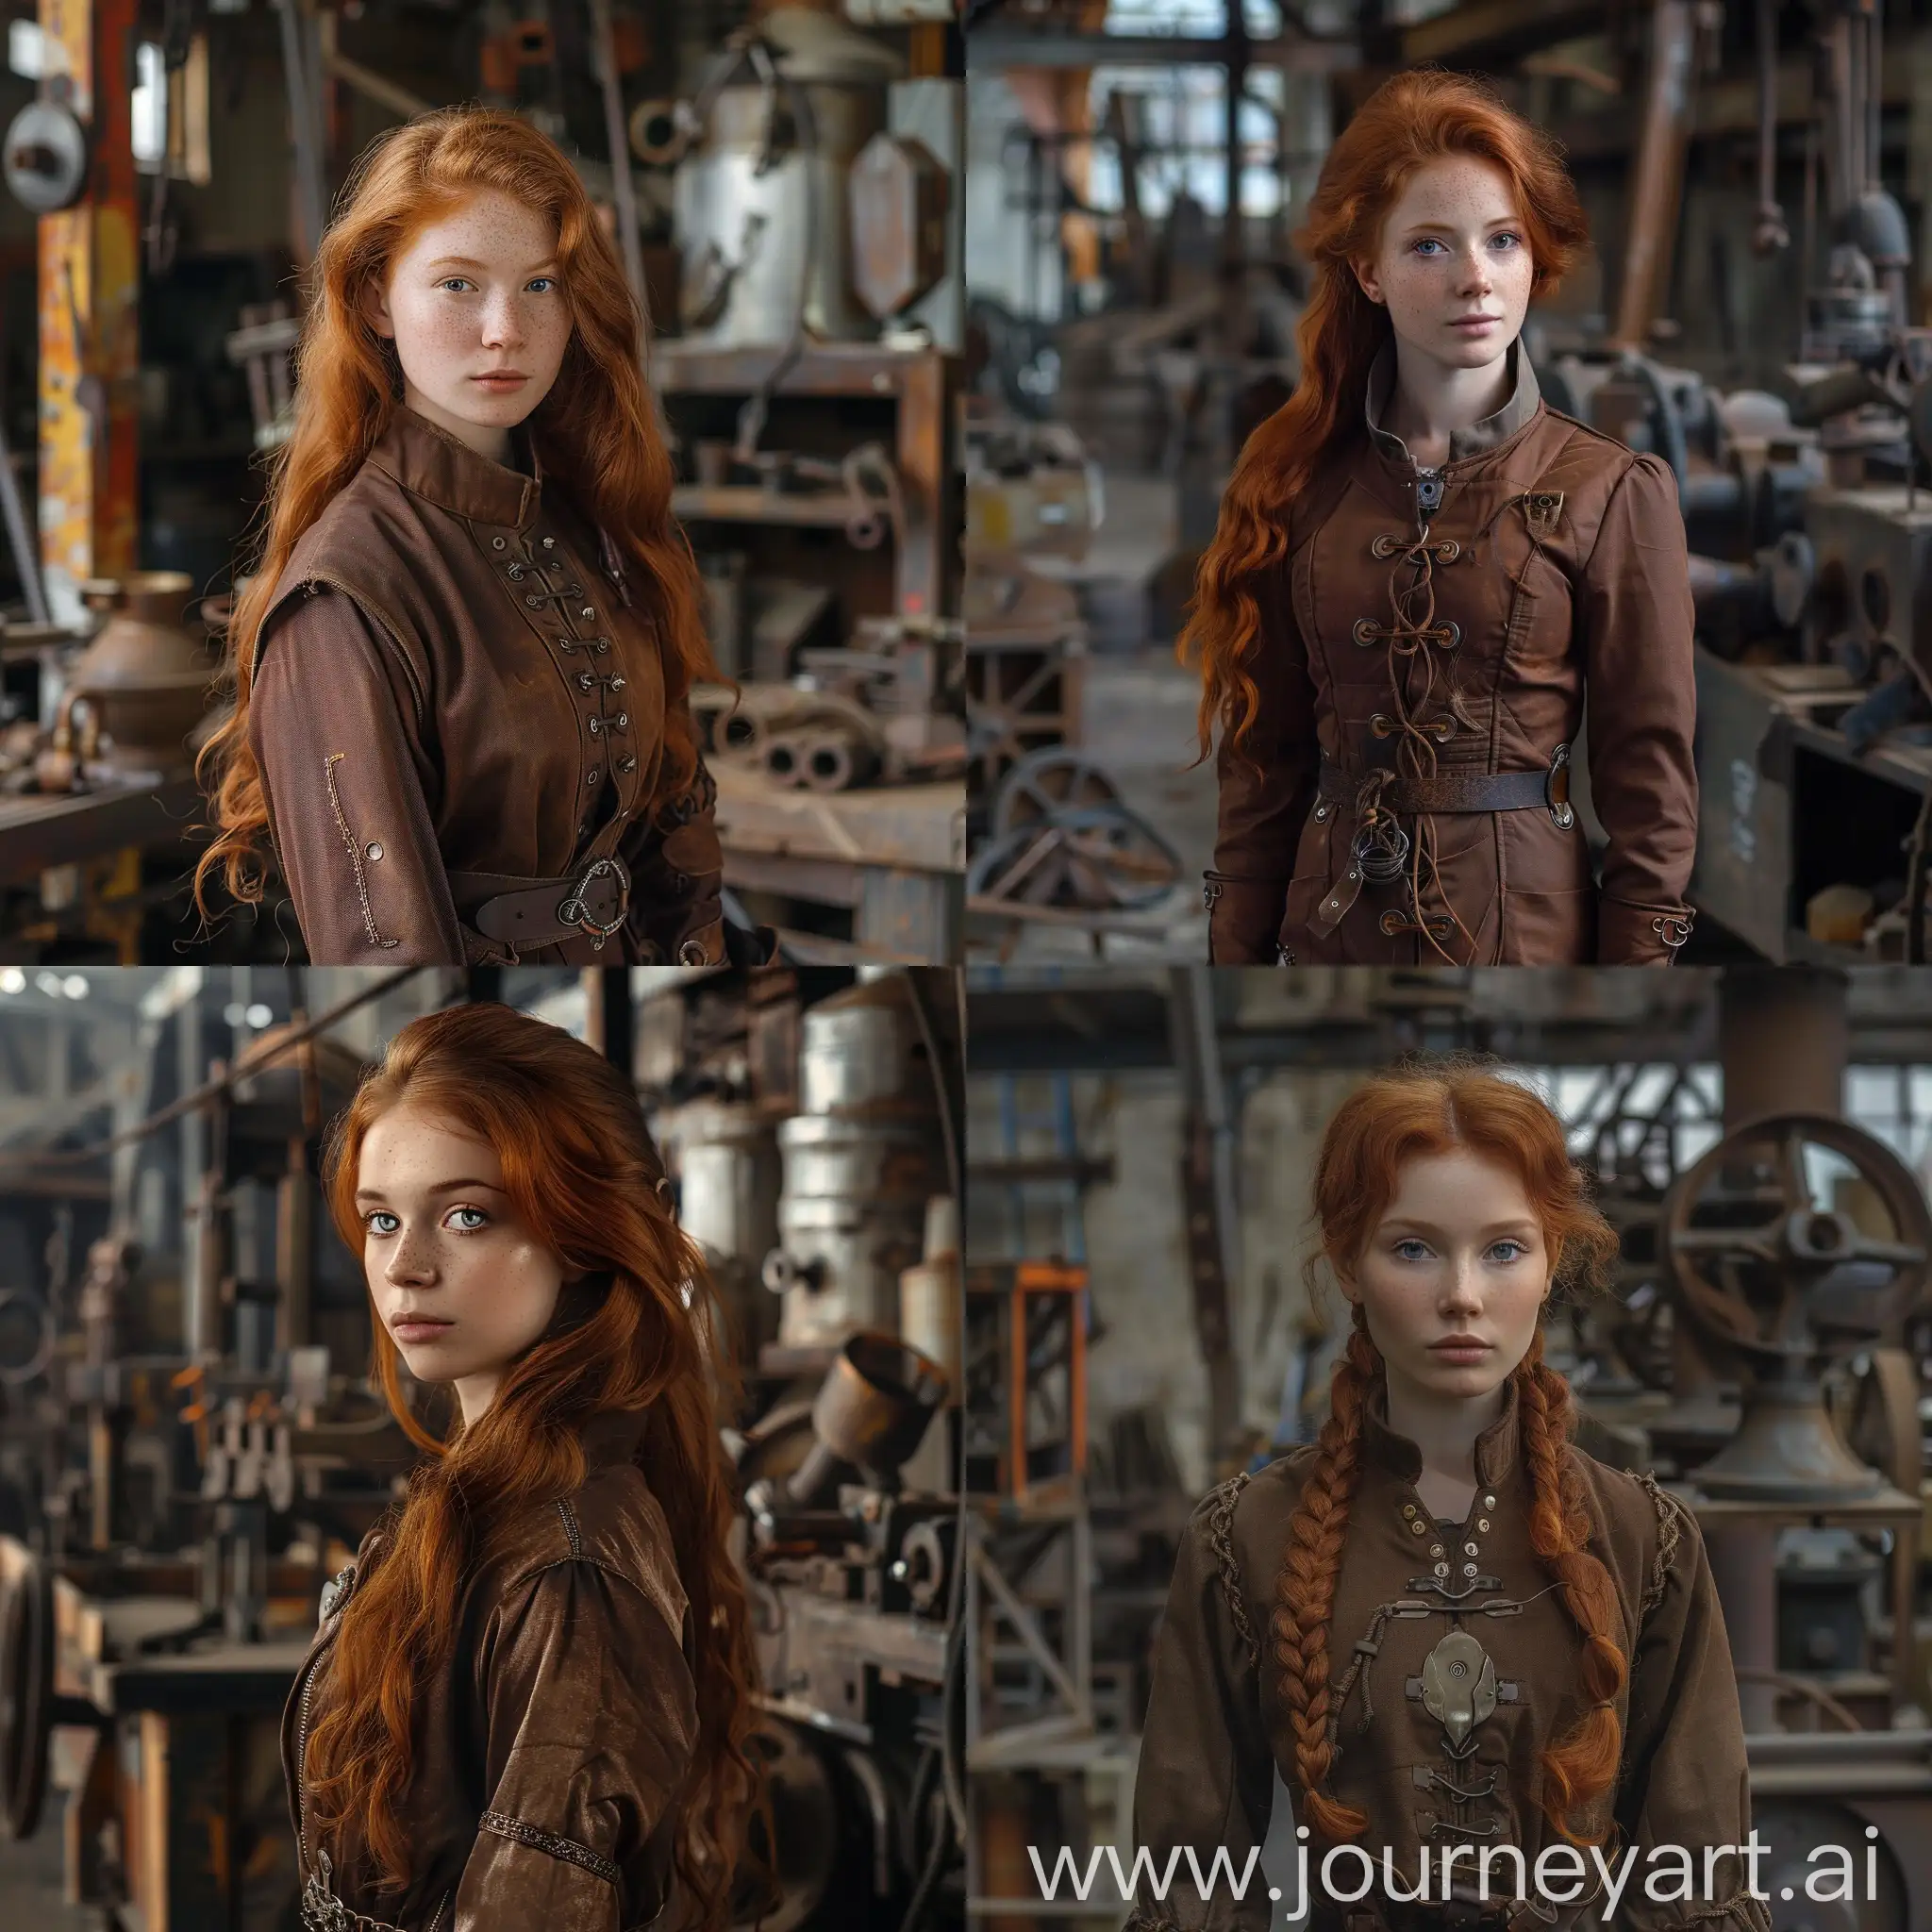 Young-Inventor-Redhead-Girl-in-Brown-Medieval-Jacket-at-Metallurgical-Workshop